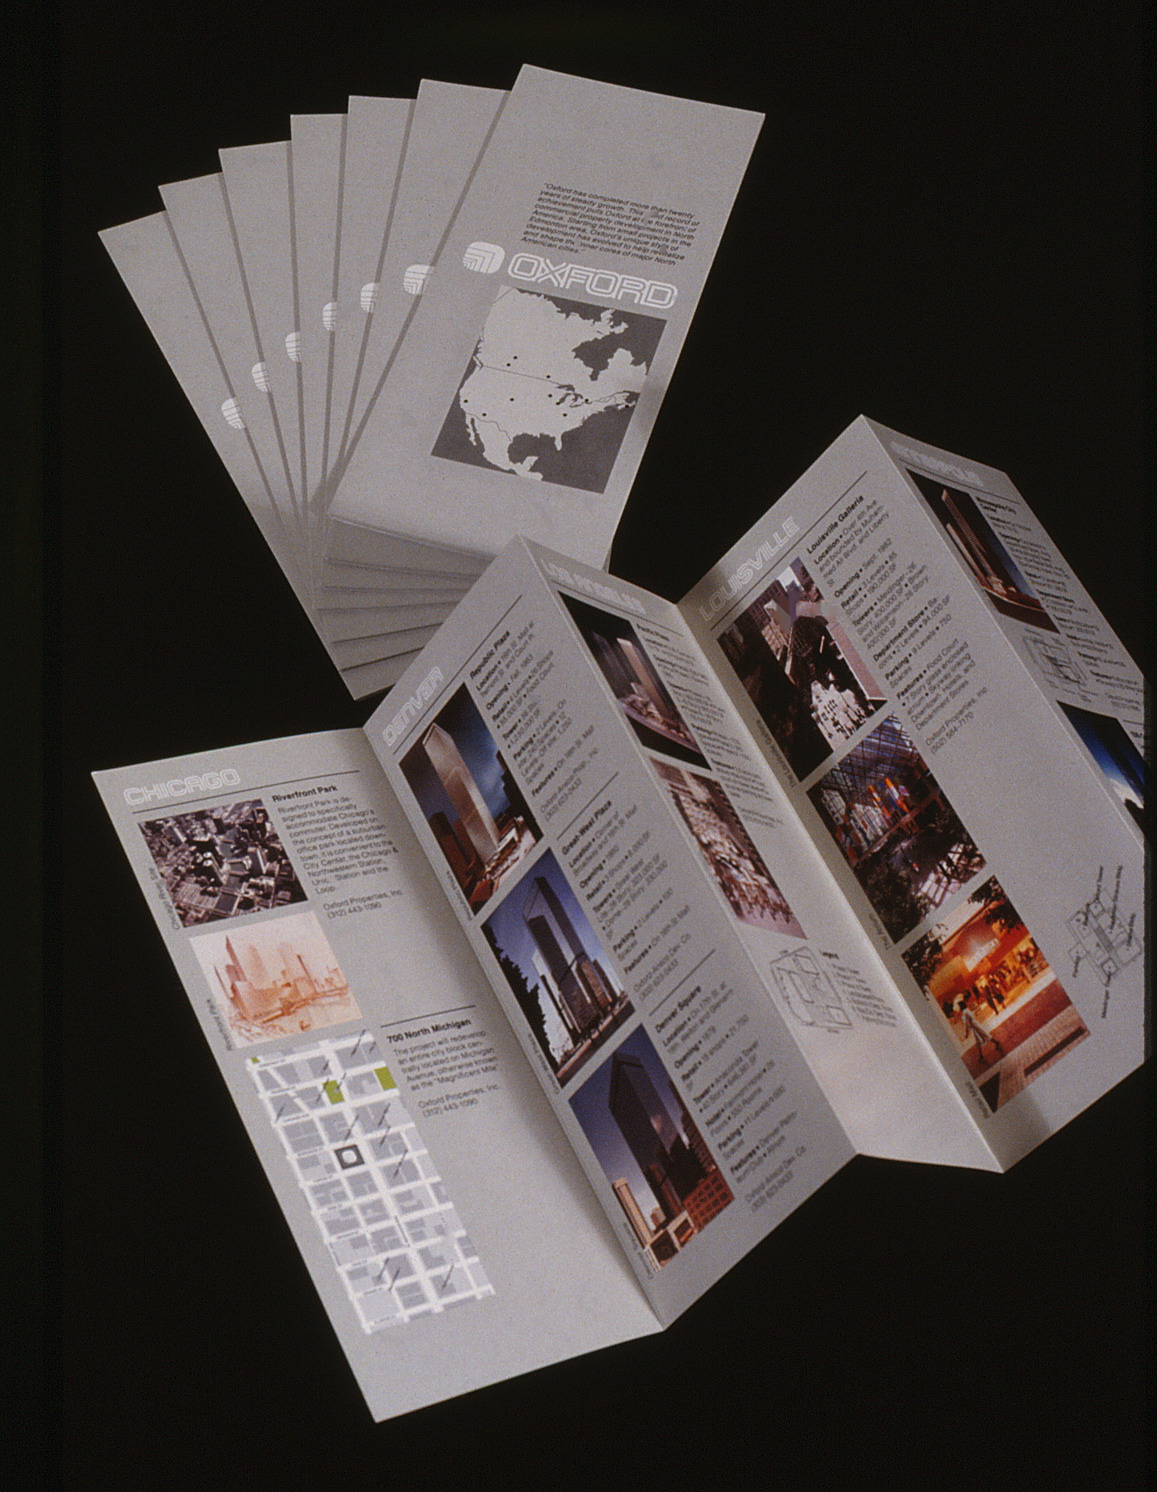 The fold-out brochures shown closed and folded out with multiple spines.